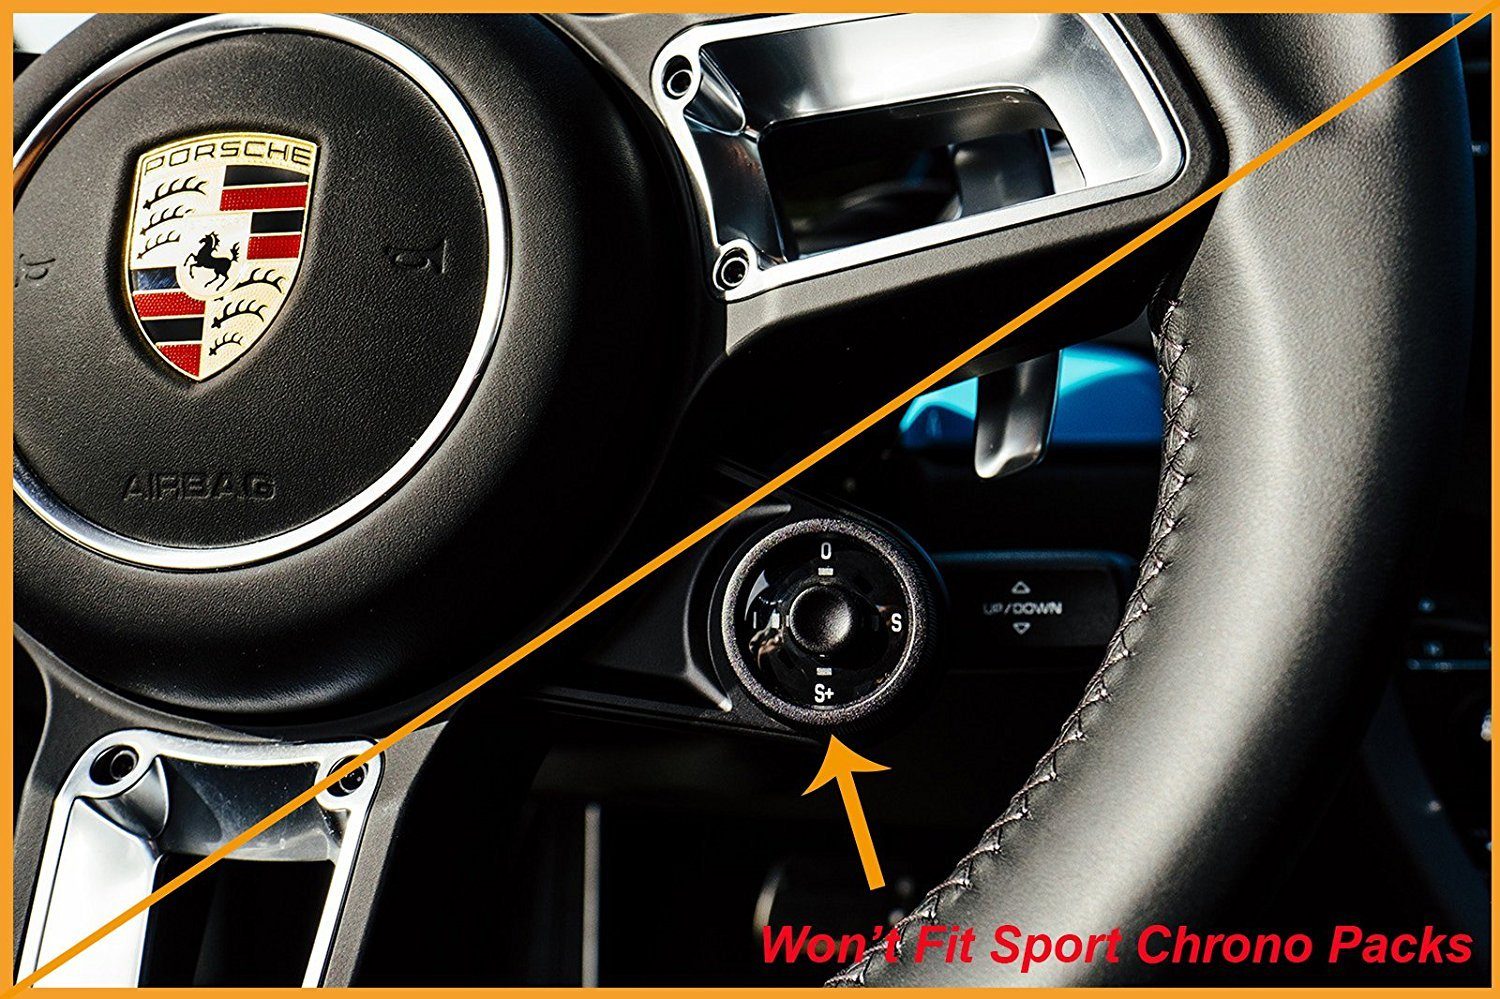 Pinalloy Real Carbon Fiber Steering Wheel Paddle Shifter Extensions For 2016-17 Porsche Cayenne Macan Panamera Boxster GT3 911 - Pinalloy Online Auto Accessories Lightweight Car Kit 